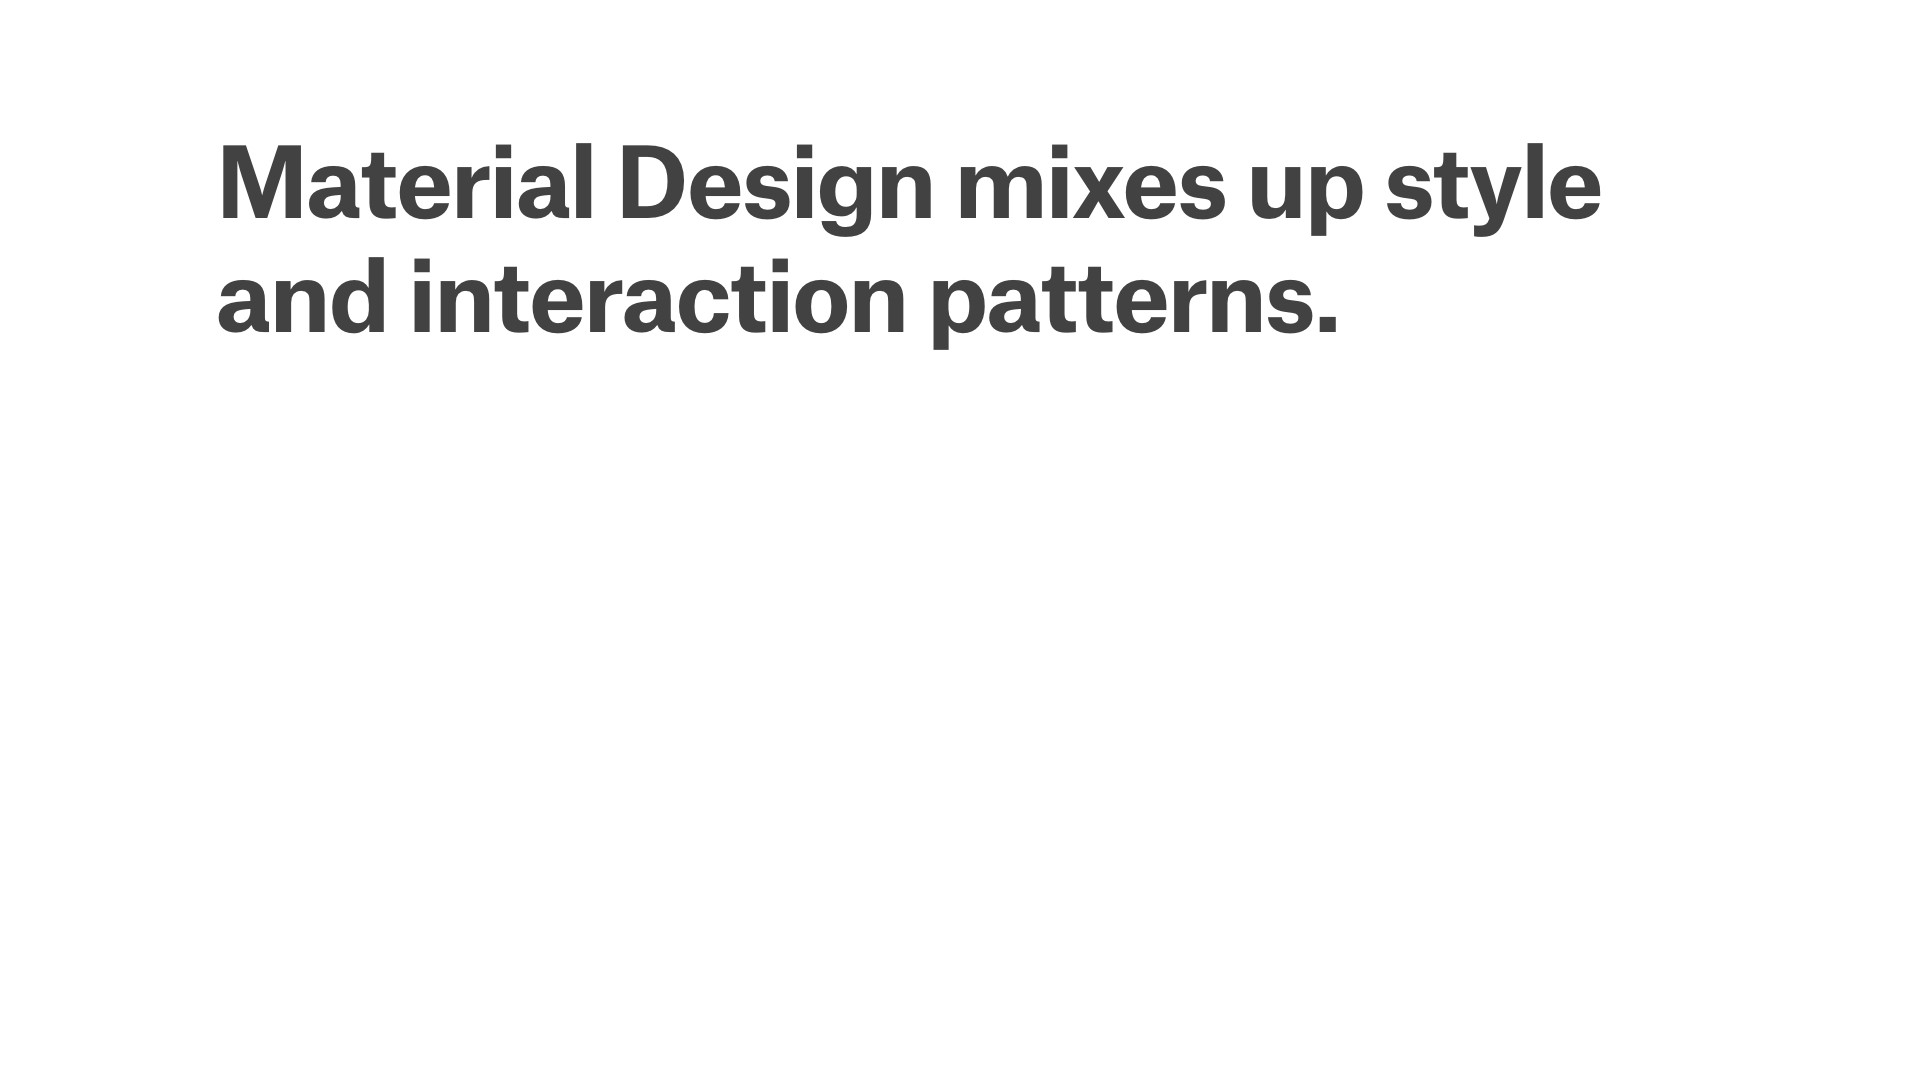 Material Design mixes up style and interaction patterns.